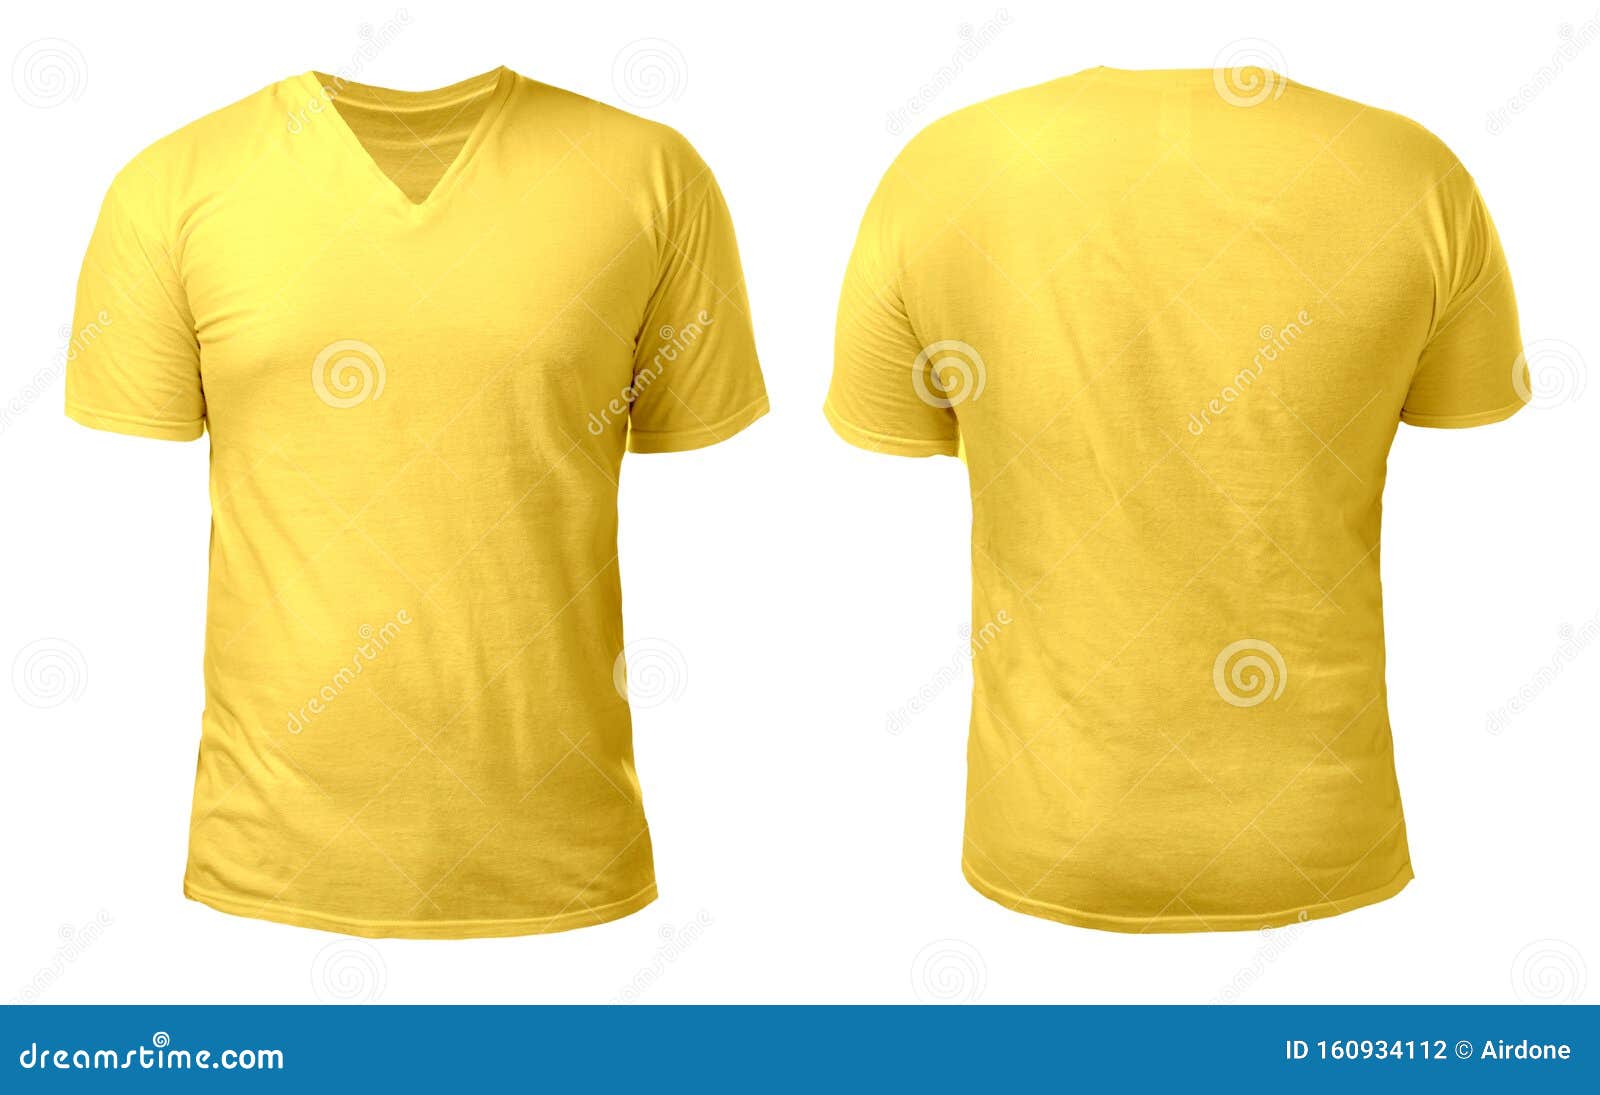 Download Yellow V-Neck Shirt Design Template Stock Photo - Image of ...